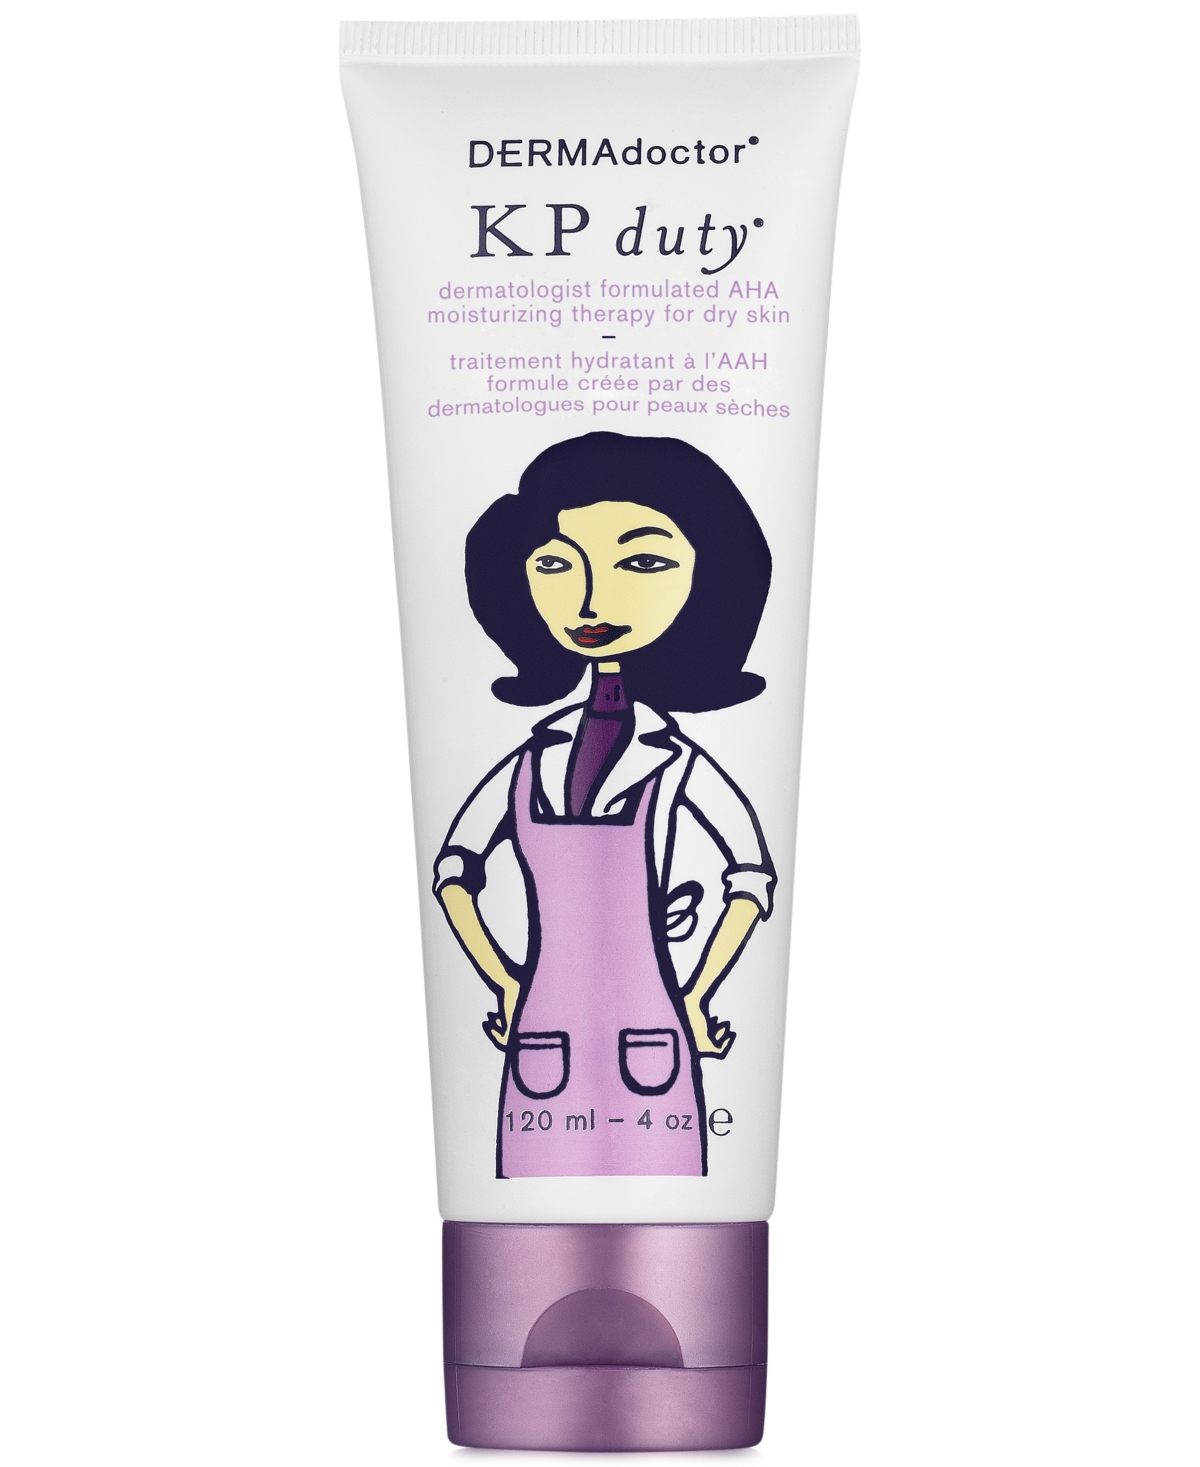 DERMAdoctor Kp Duty Dermatologist Formulated Aha Moisturizing Therapy for Dry Skin, 4oz.